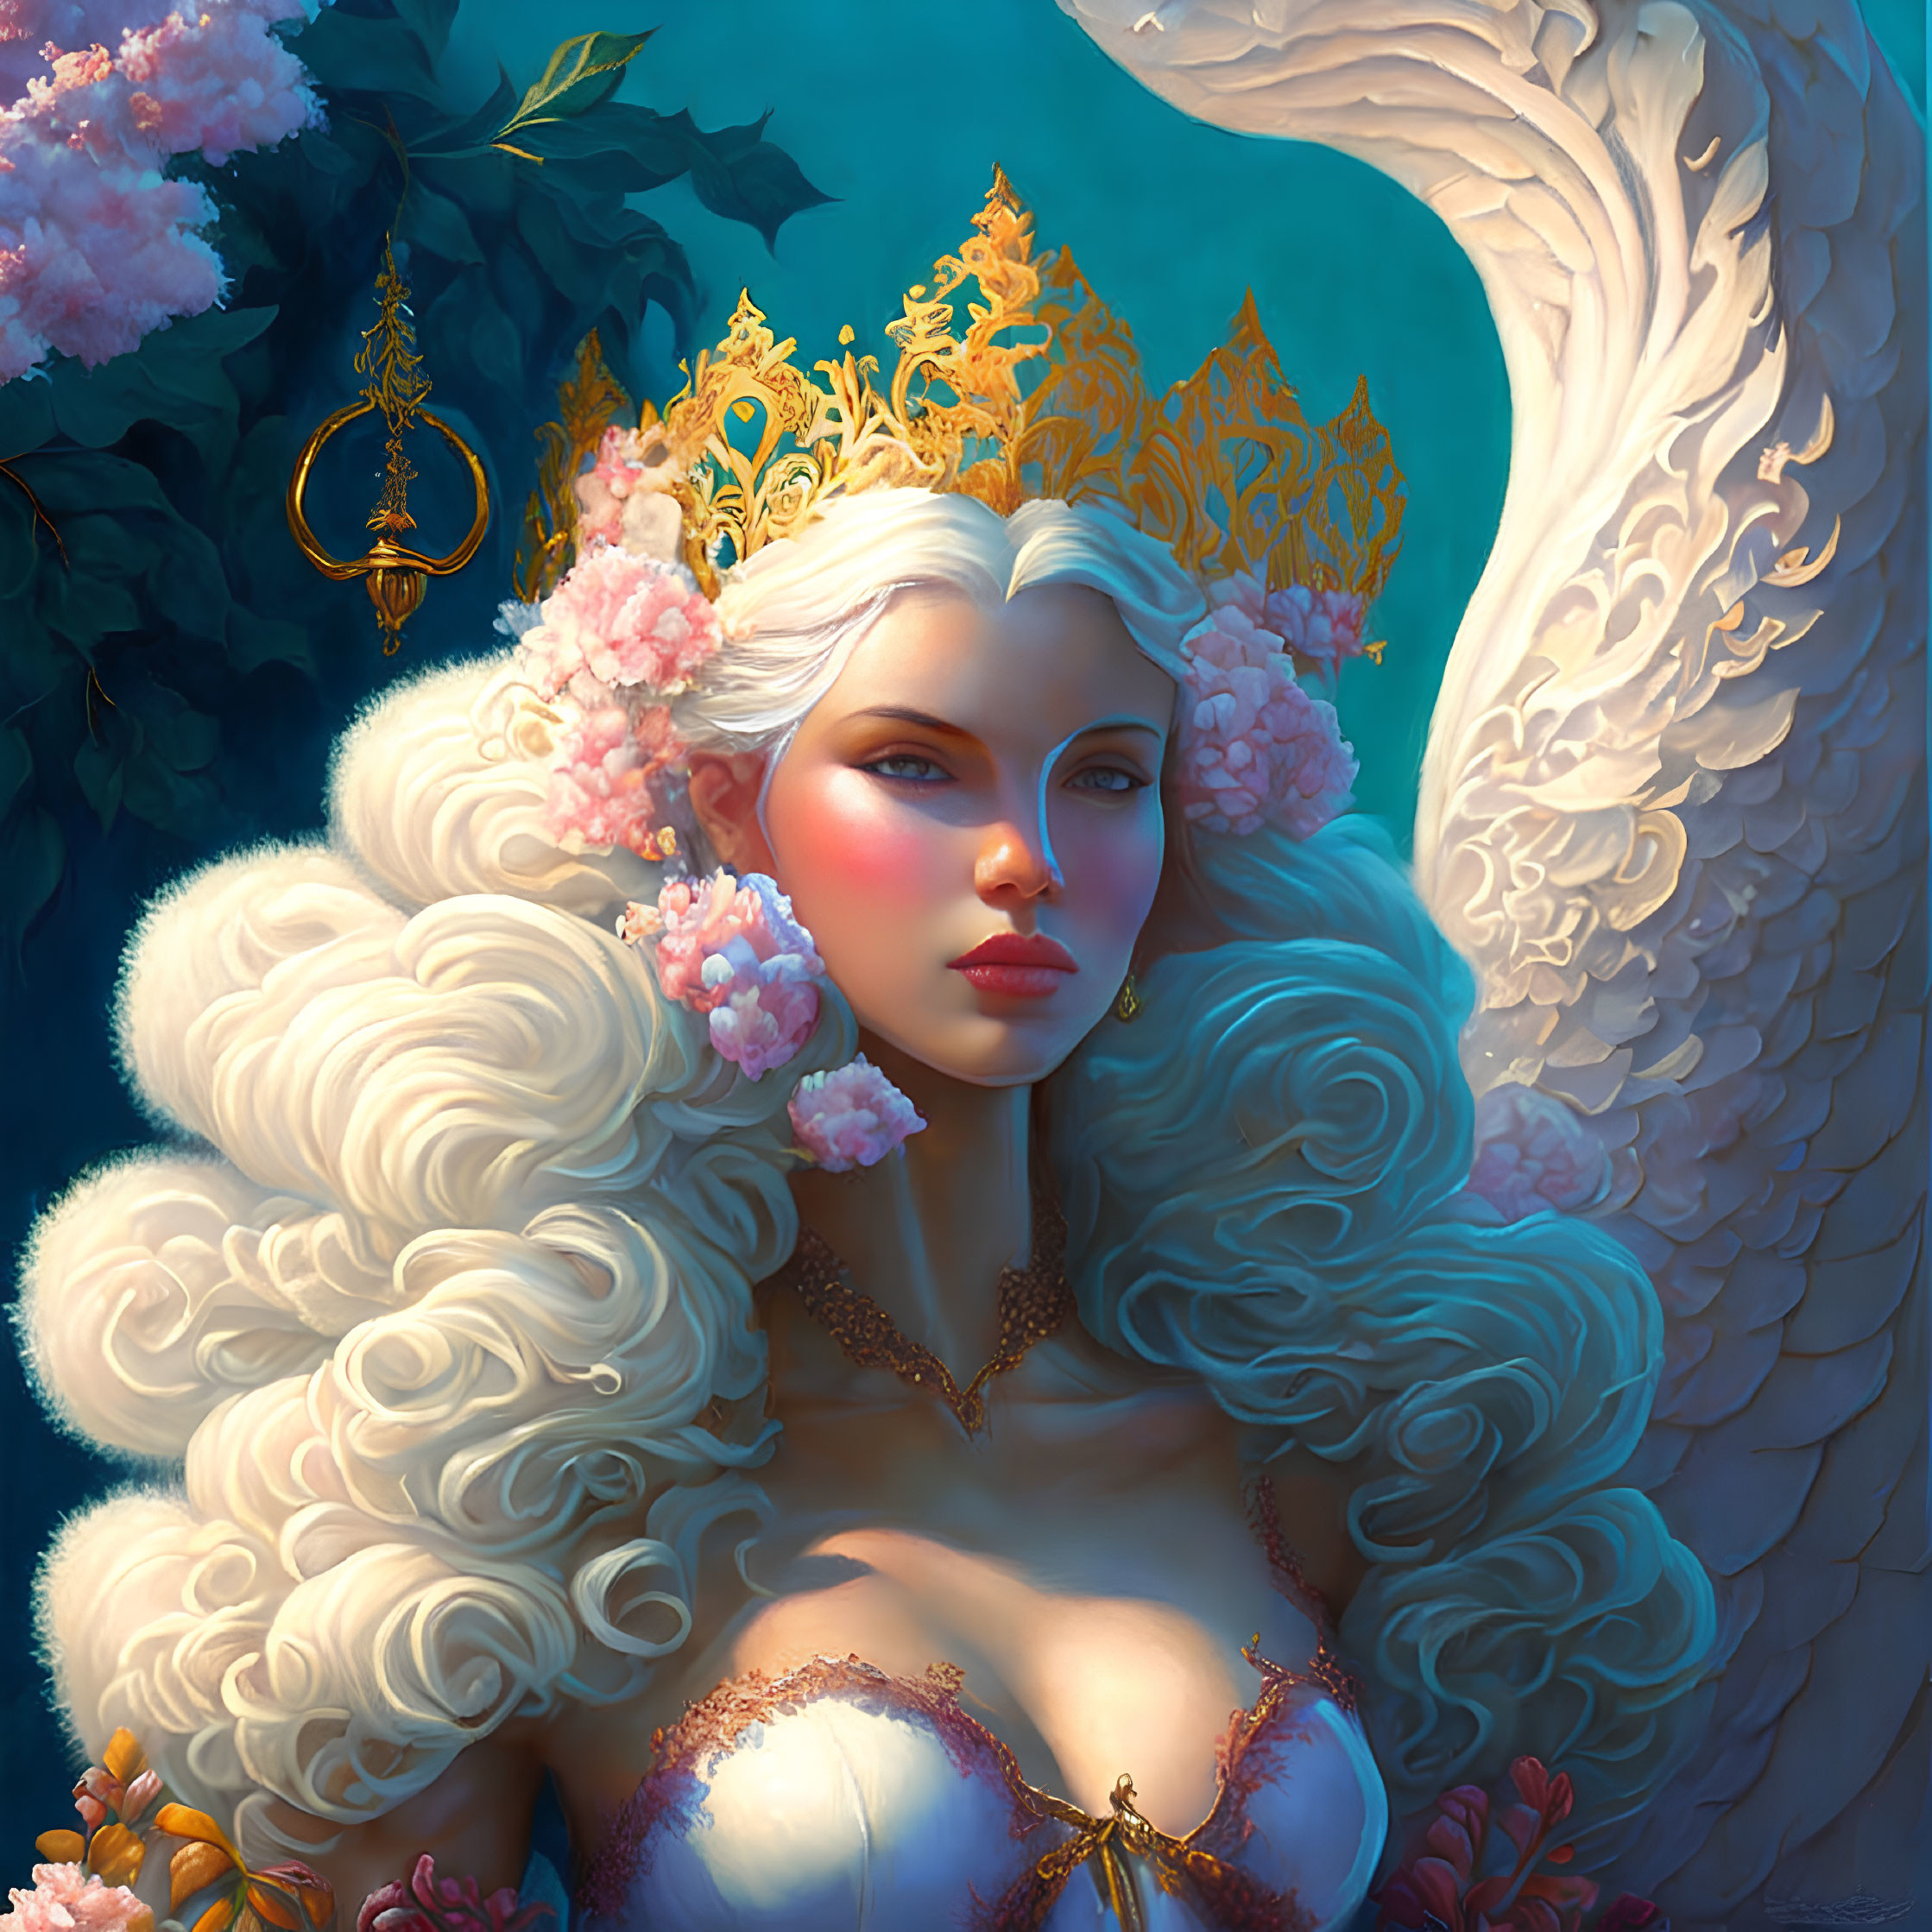 Regal woman with golden crown, surrounded by lush flowers and majestic white swan